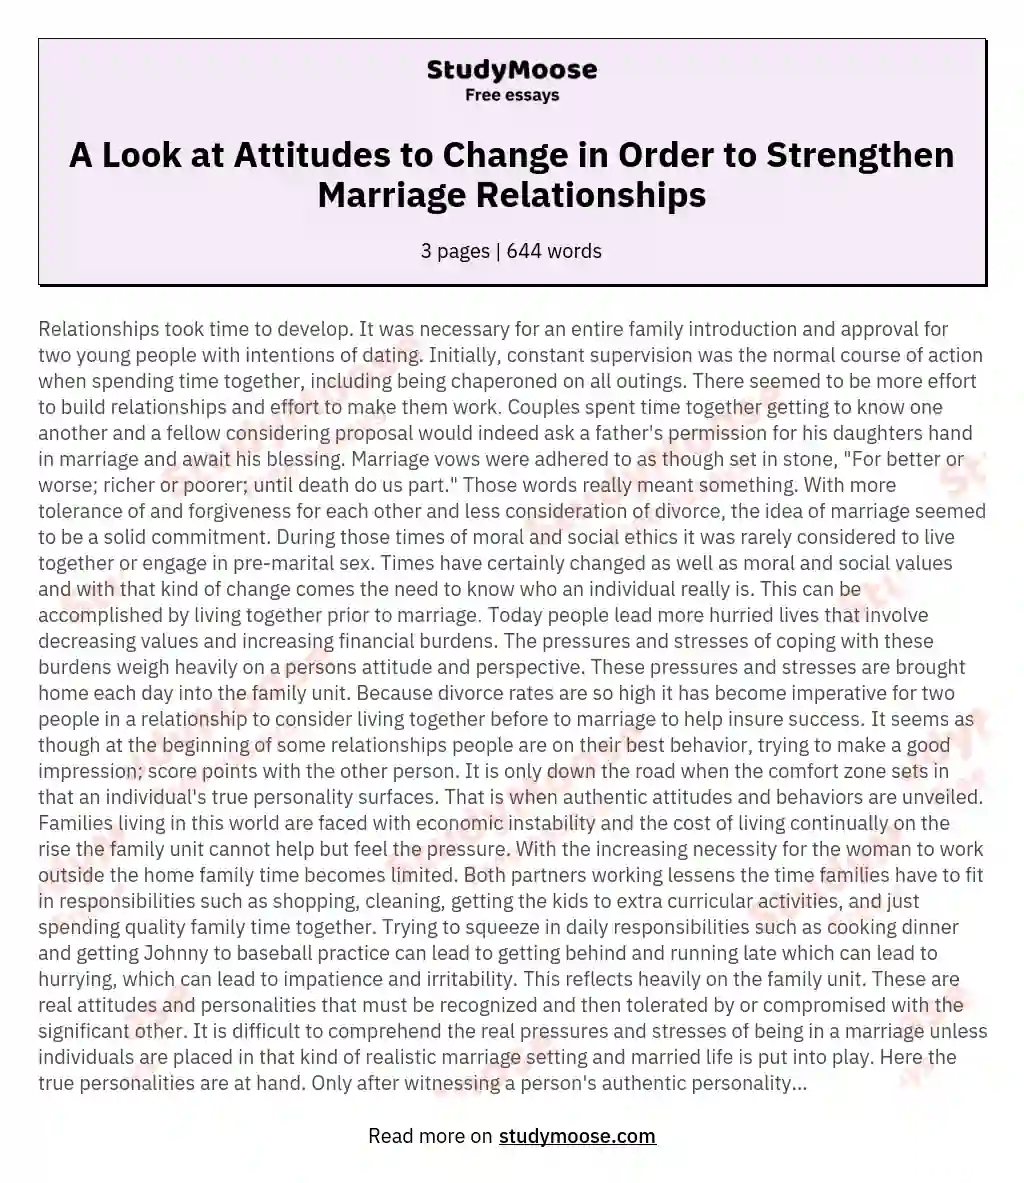 A Look at Attitudes to Change in Order to Strengthen Marriage Relationships essay